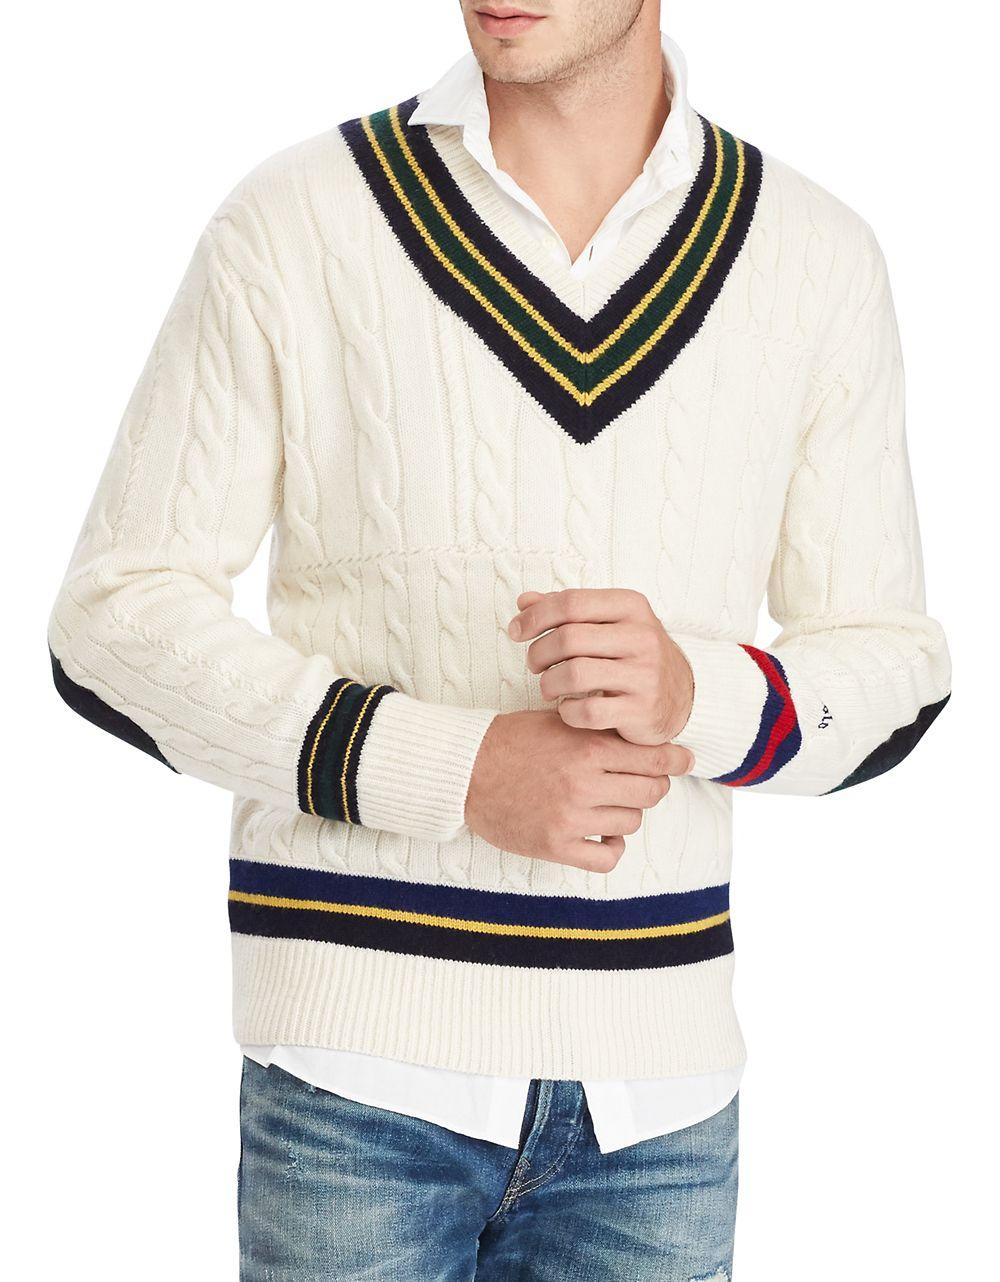 Lyst - Polo Ralph Lauren Iconic Cricket Sweater for Men